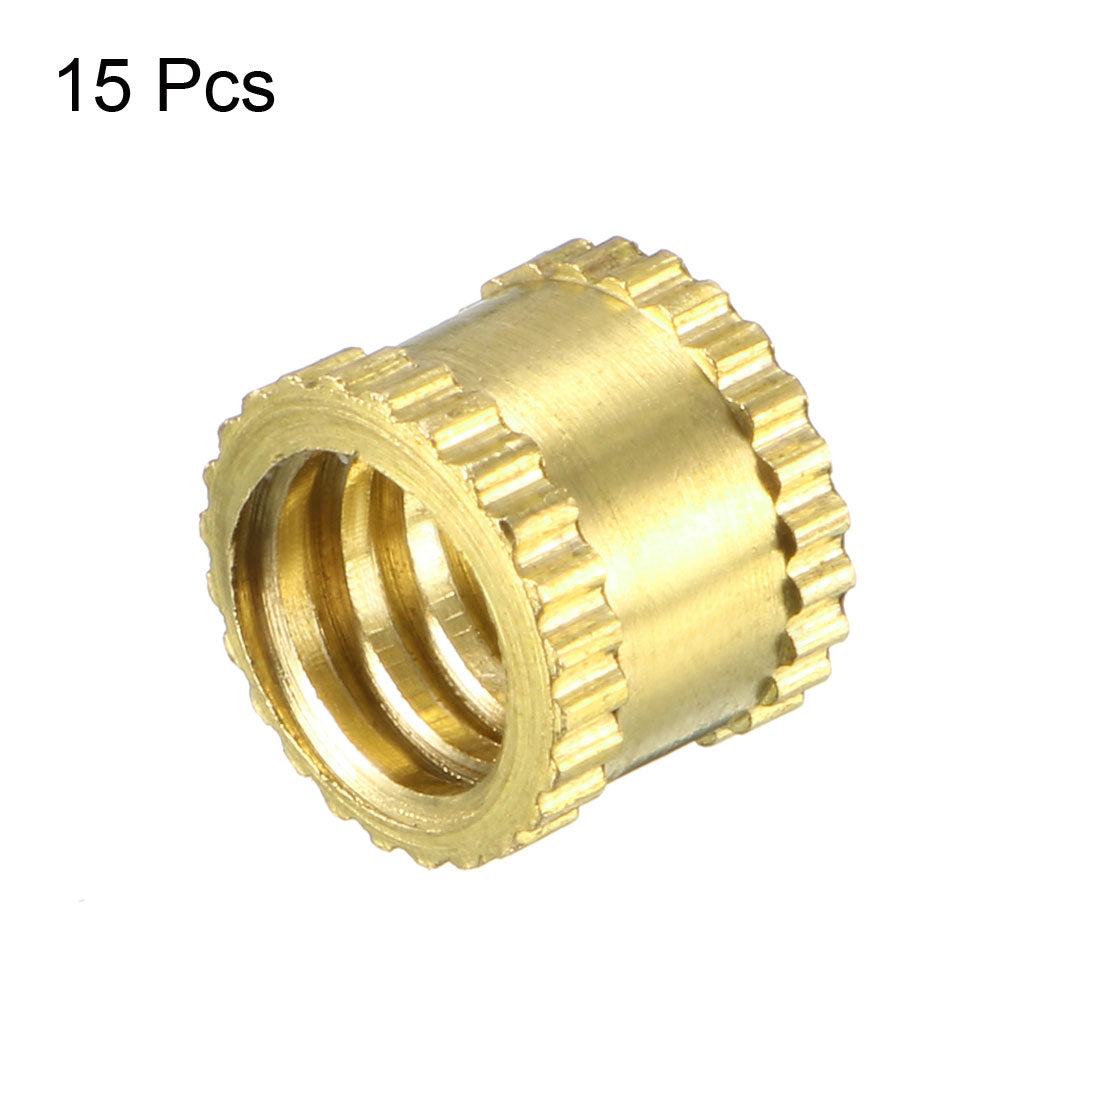 uxcell Uxcell 1/4"-20 Female Brass Knurled Threaded Insert Embedment Nut for 3D Printer, 15Pcs